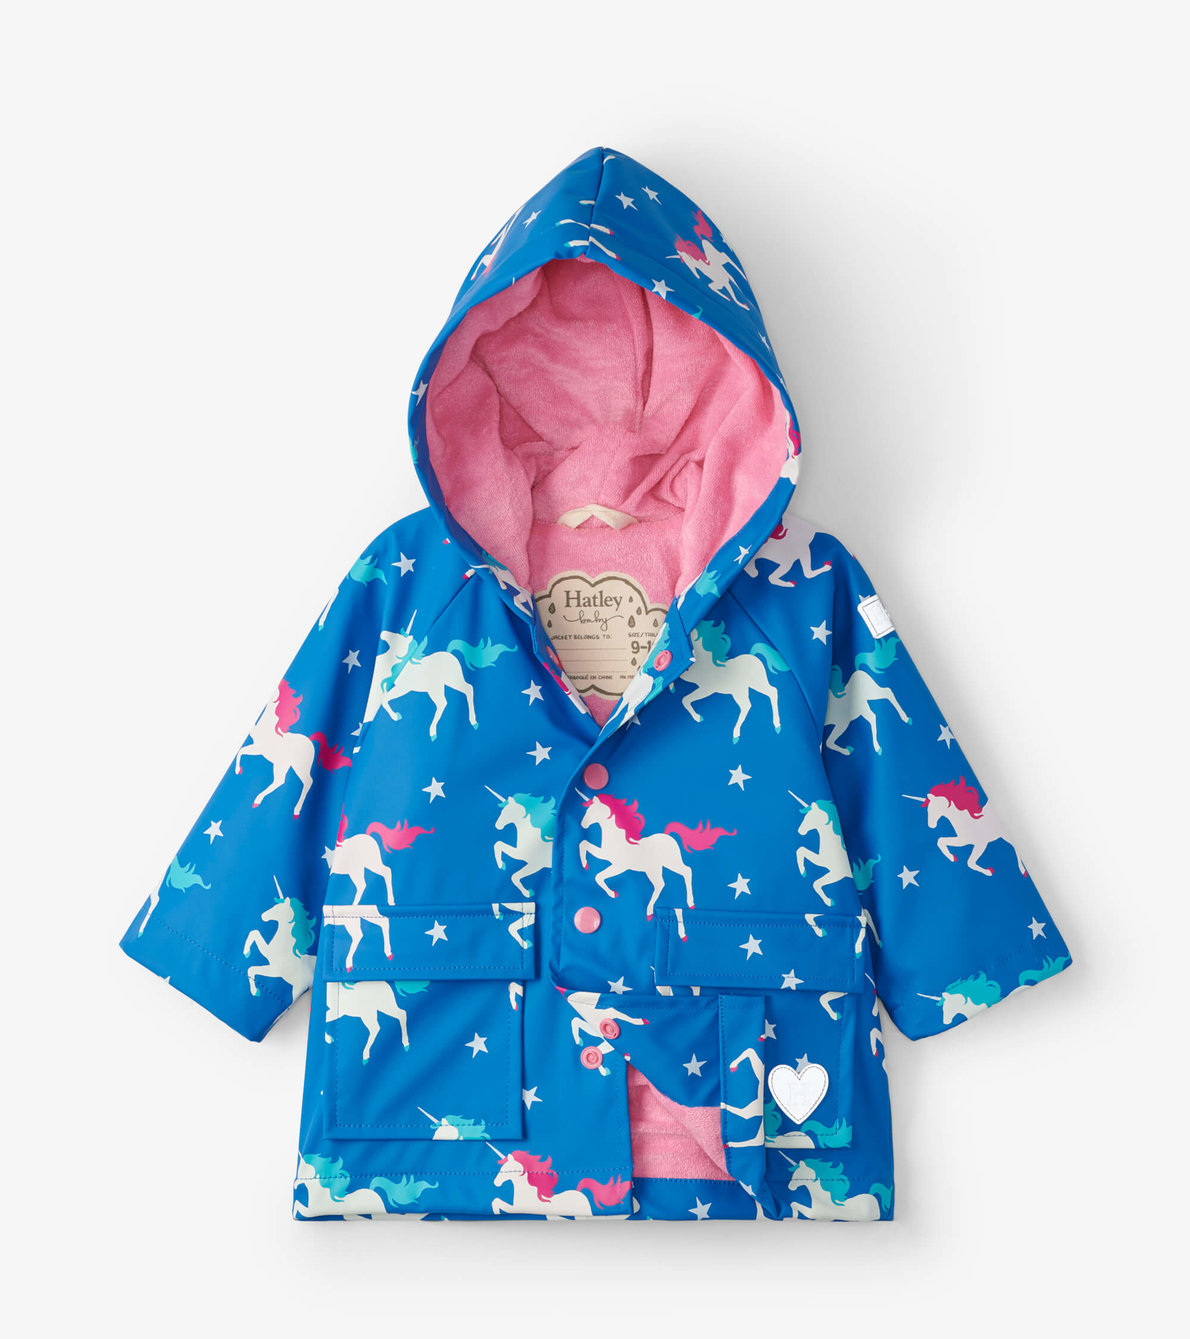 View larger image of Twinkle Unicorns Colour Changing Baby Raincoat